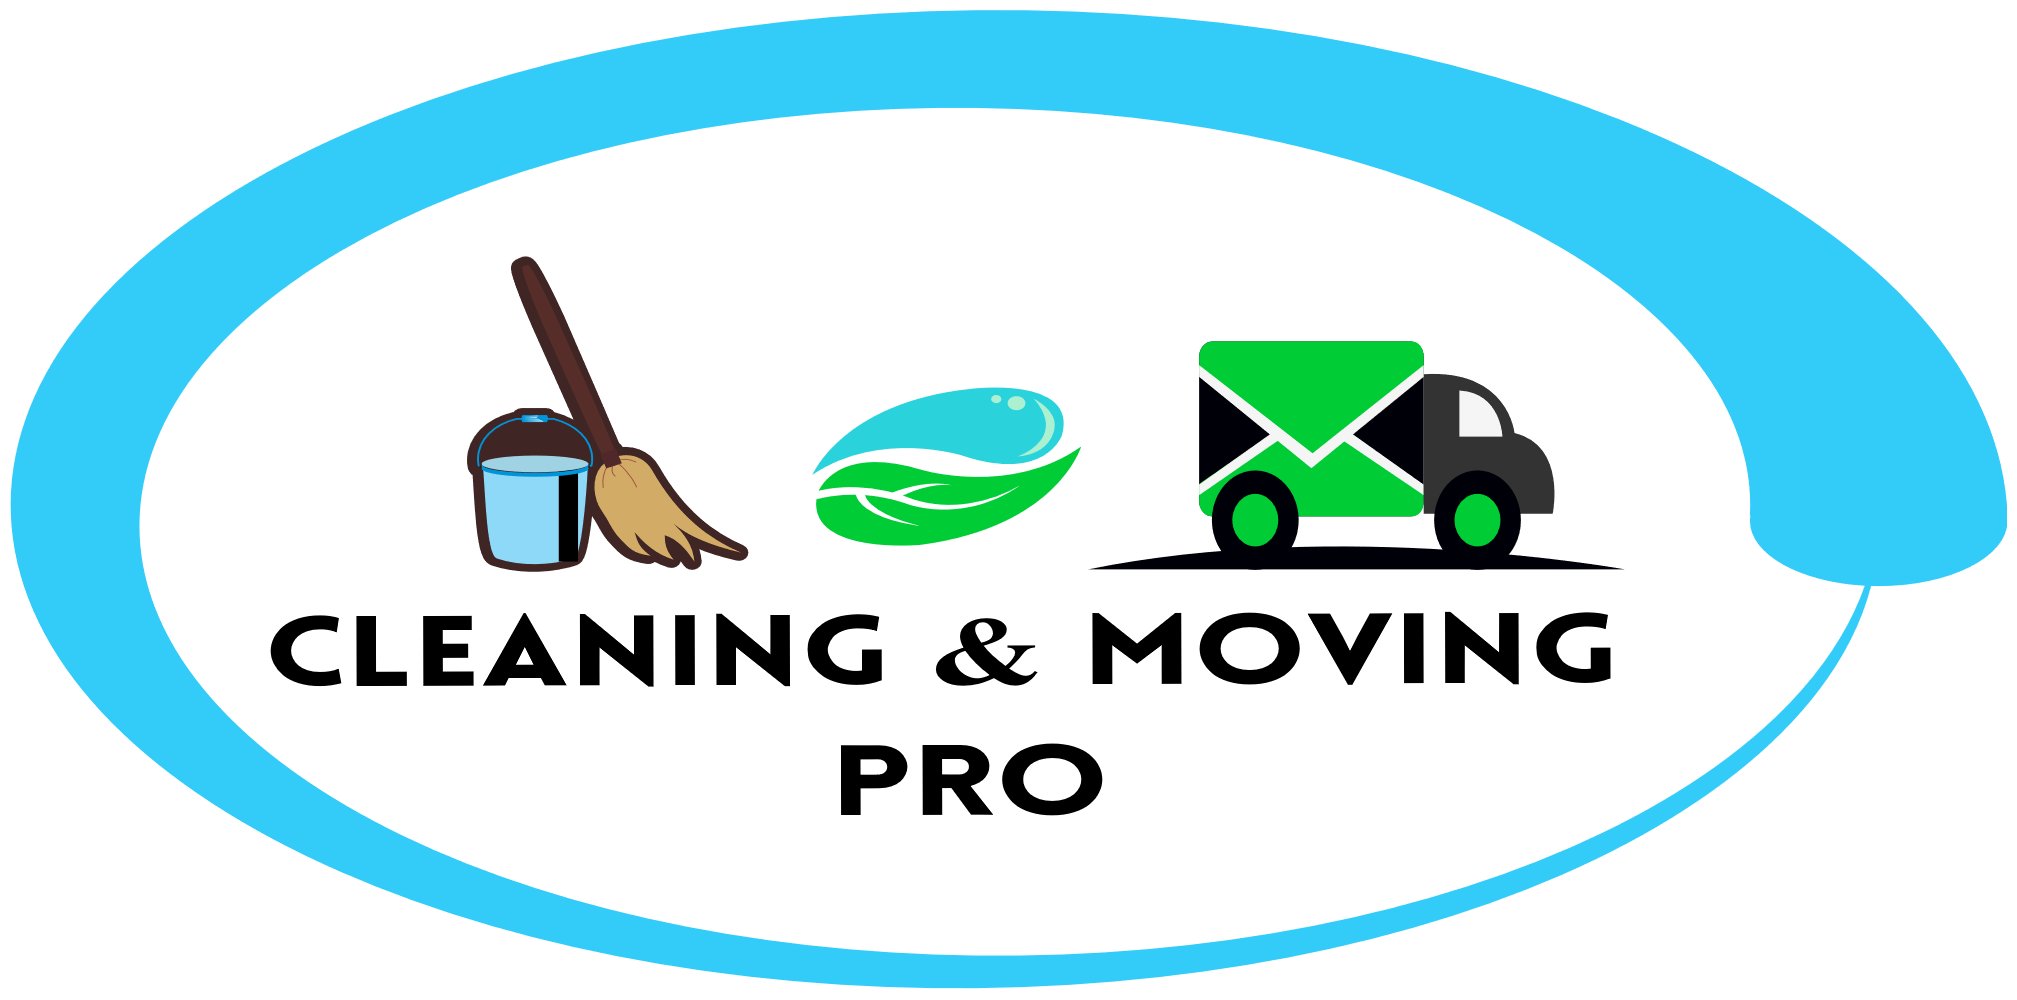 Galway Cleaning / Professional Cleaning Services in Galway.-CLEANING AND MOVING PRO